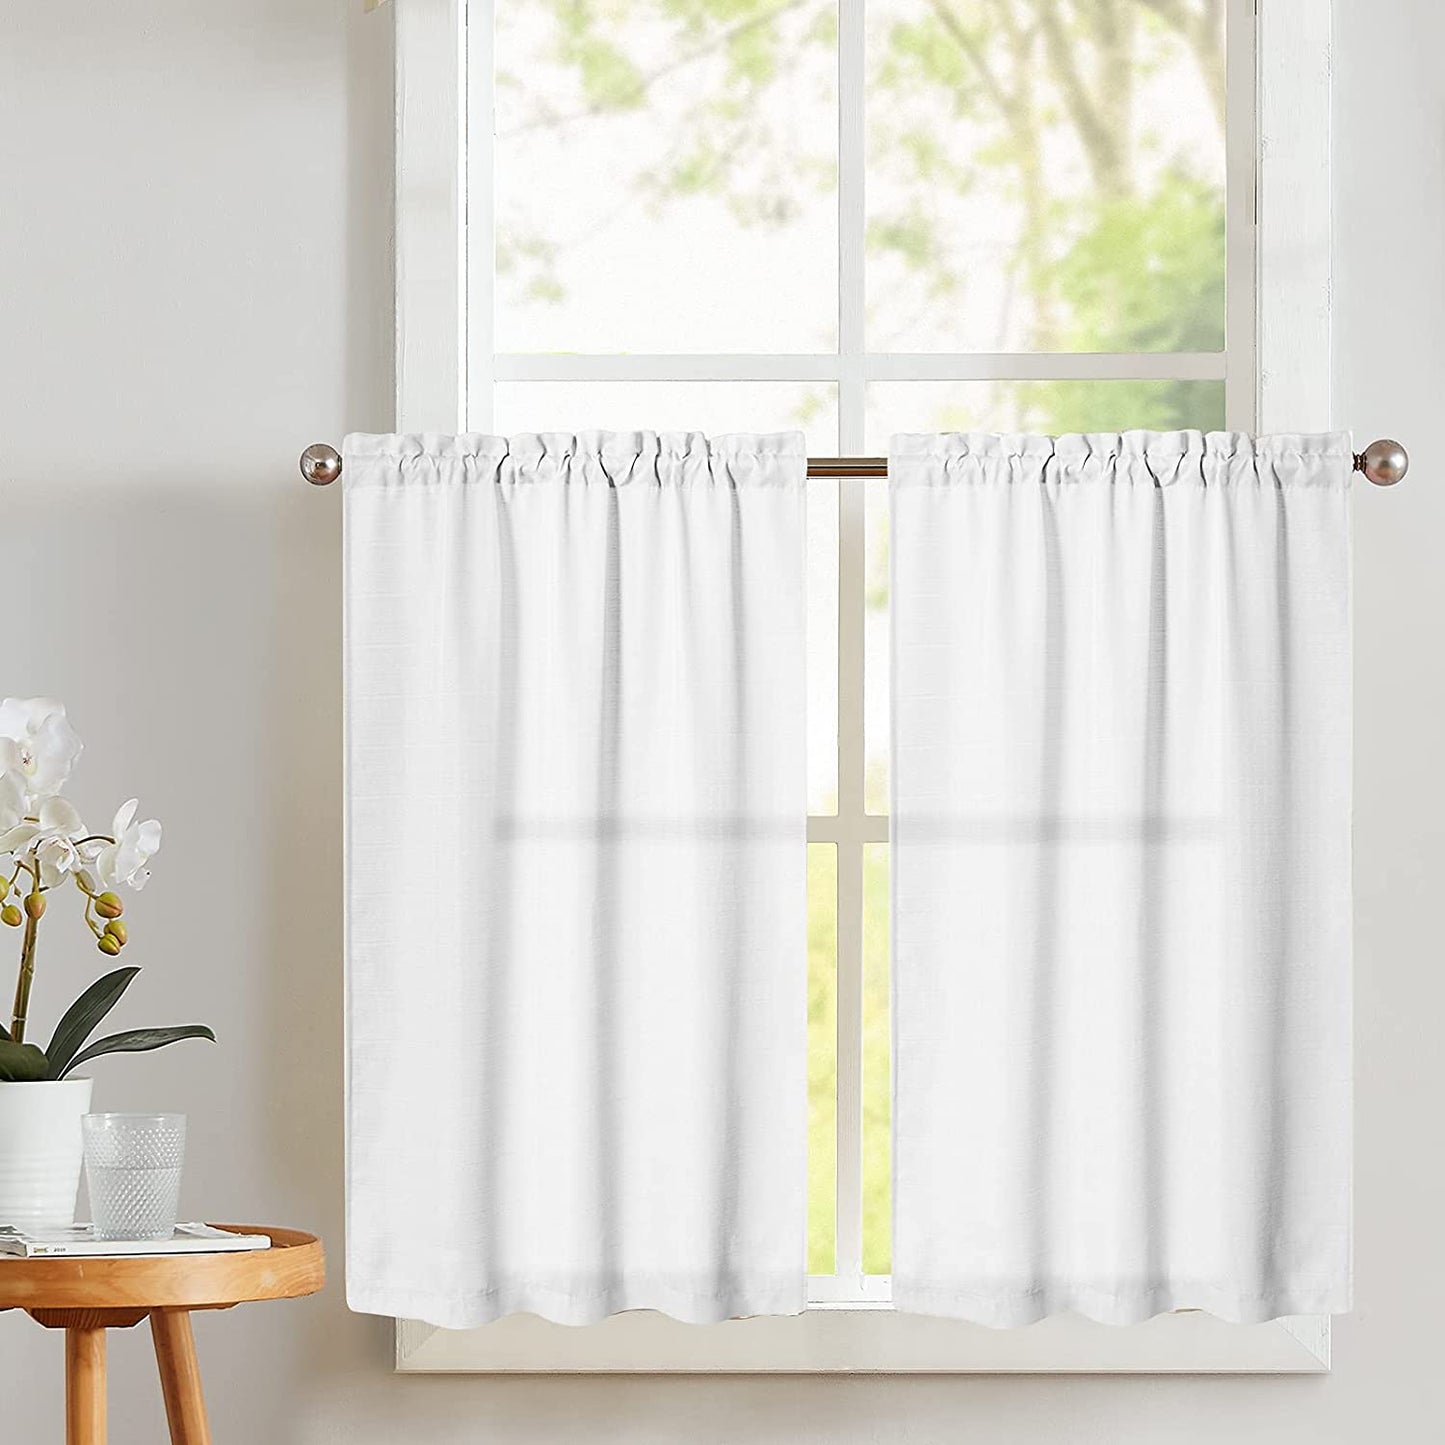 Jinchan Beige Kitchen Curtains Linen Tier Curtains 24 Inch Farmhouse Cafe Curtains Light Filtering Small Window Curtains Flax Country Rustic Rod Pocket Bathroom Laundry Room RV 2 Panels Crude  CKNY HOME FASHION Casual Textured White 45L 